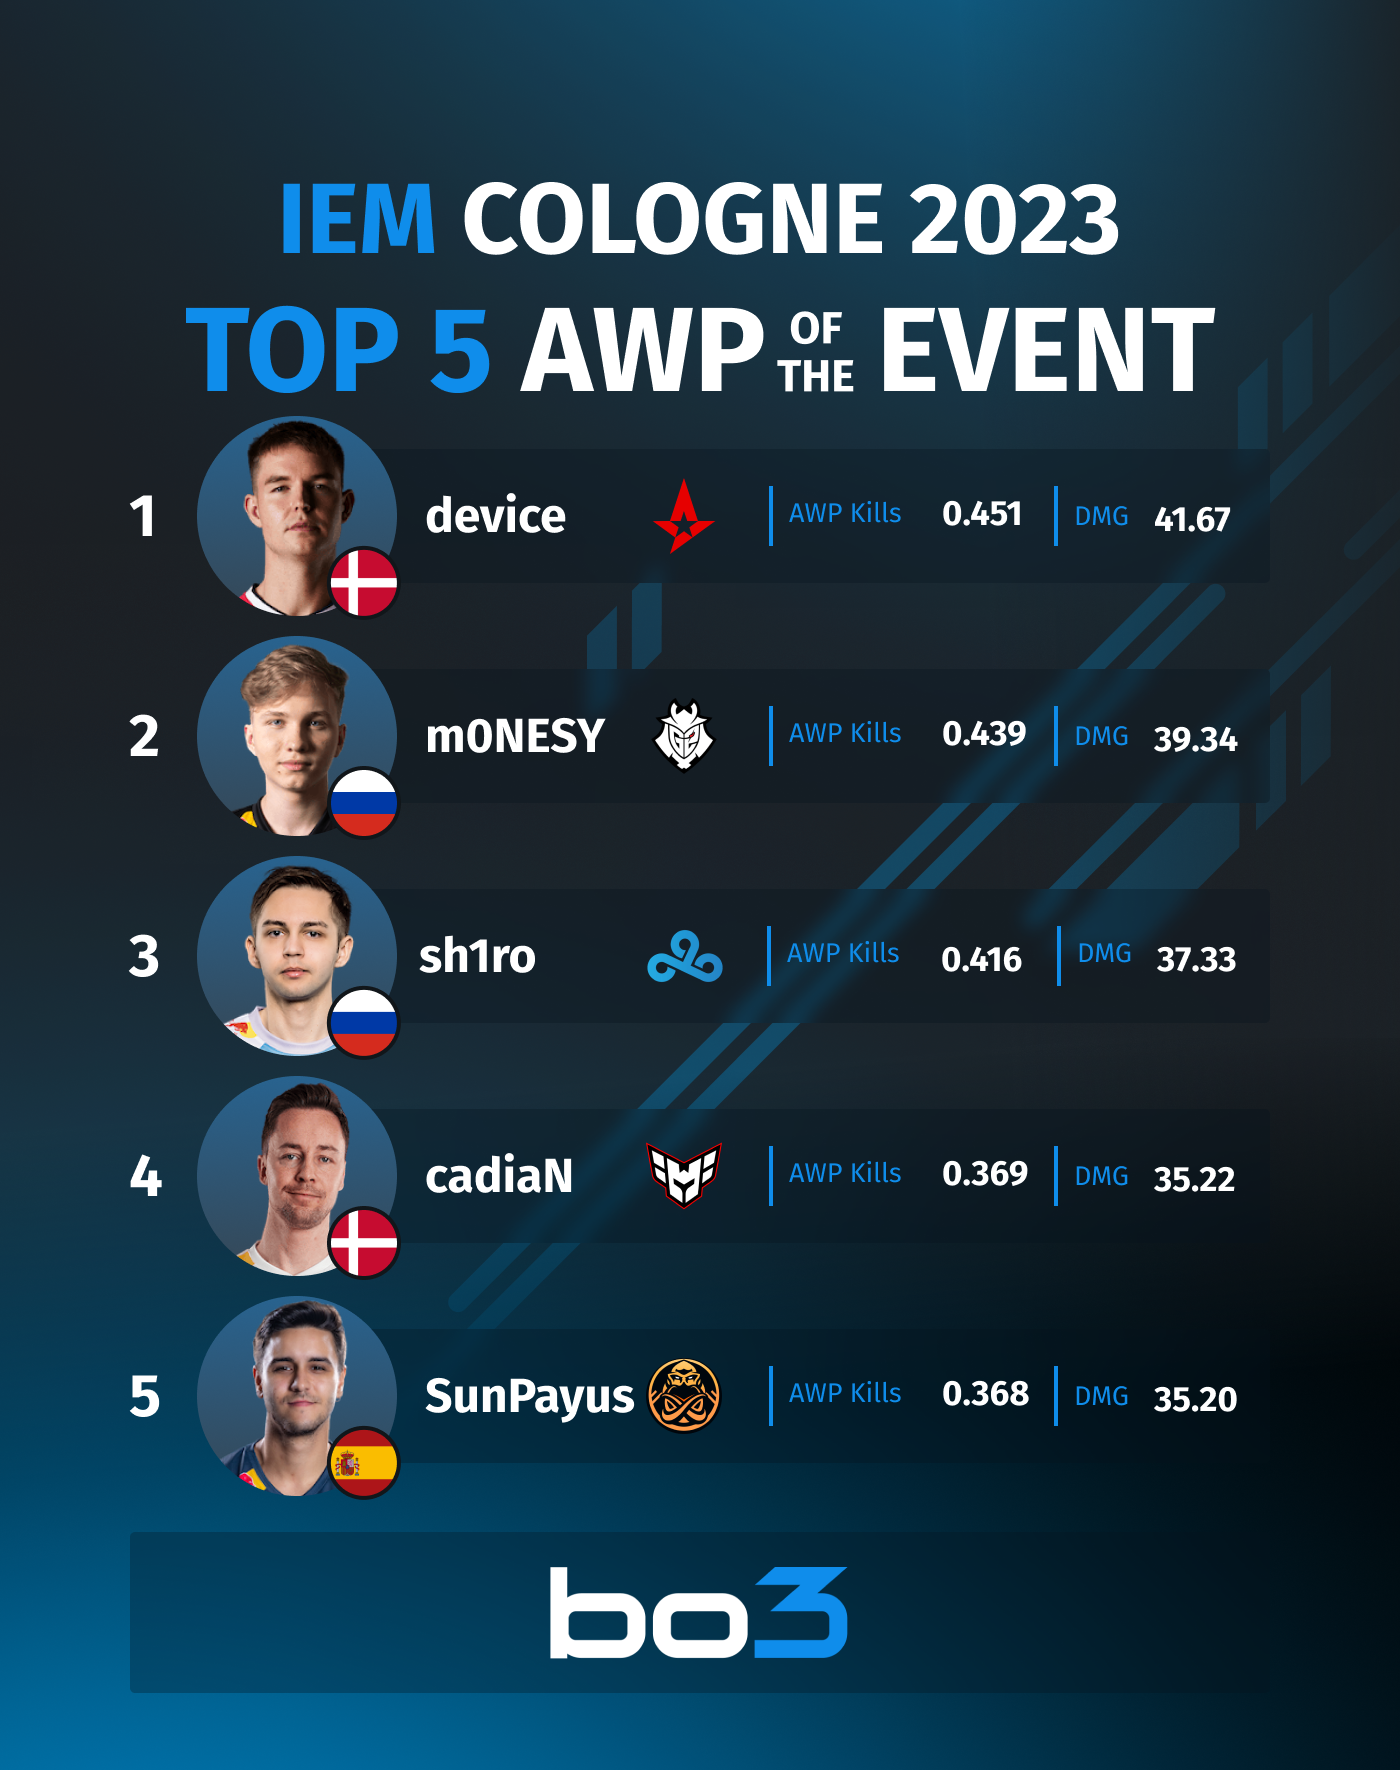 Top-5 snipers at IEM Cologne 2023